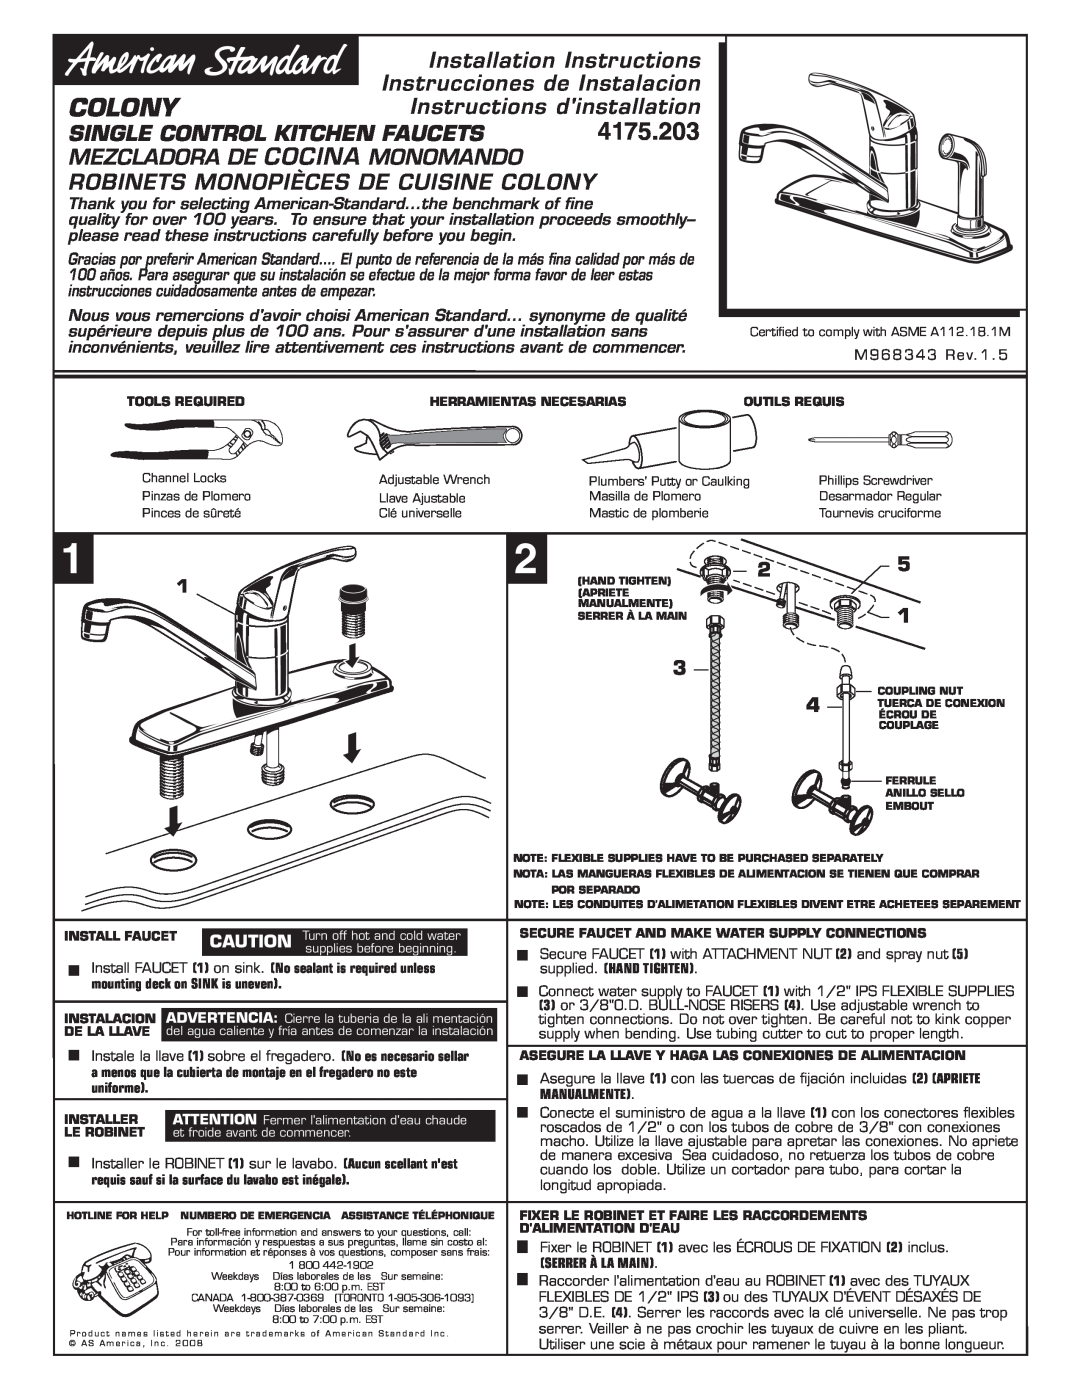 American Standard COLONY SINGLE CONTROL KITCHEN FAUCET installation instructions Single Control Kitchen Faucets, Colony 